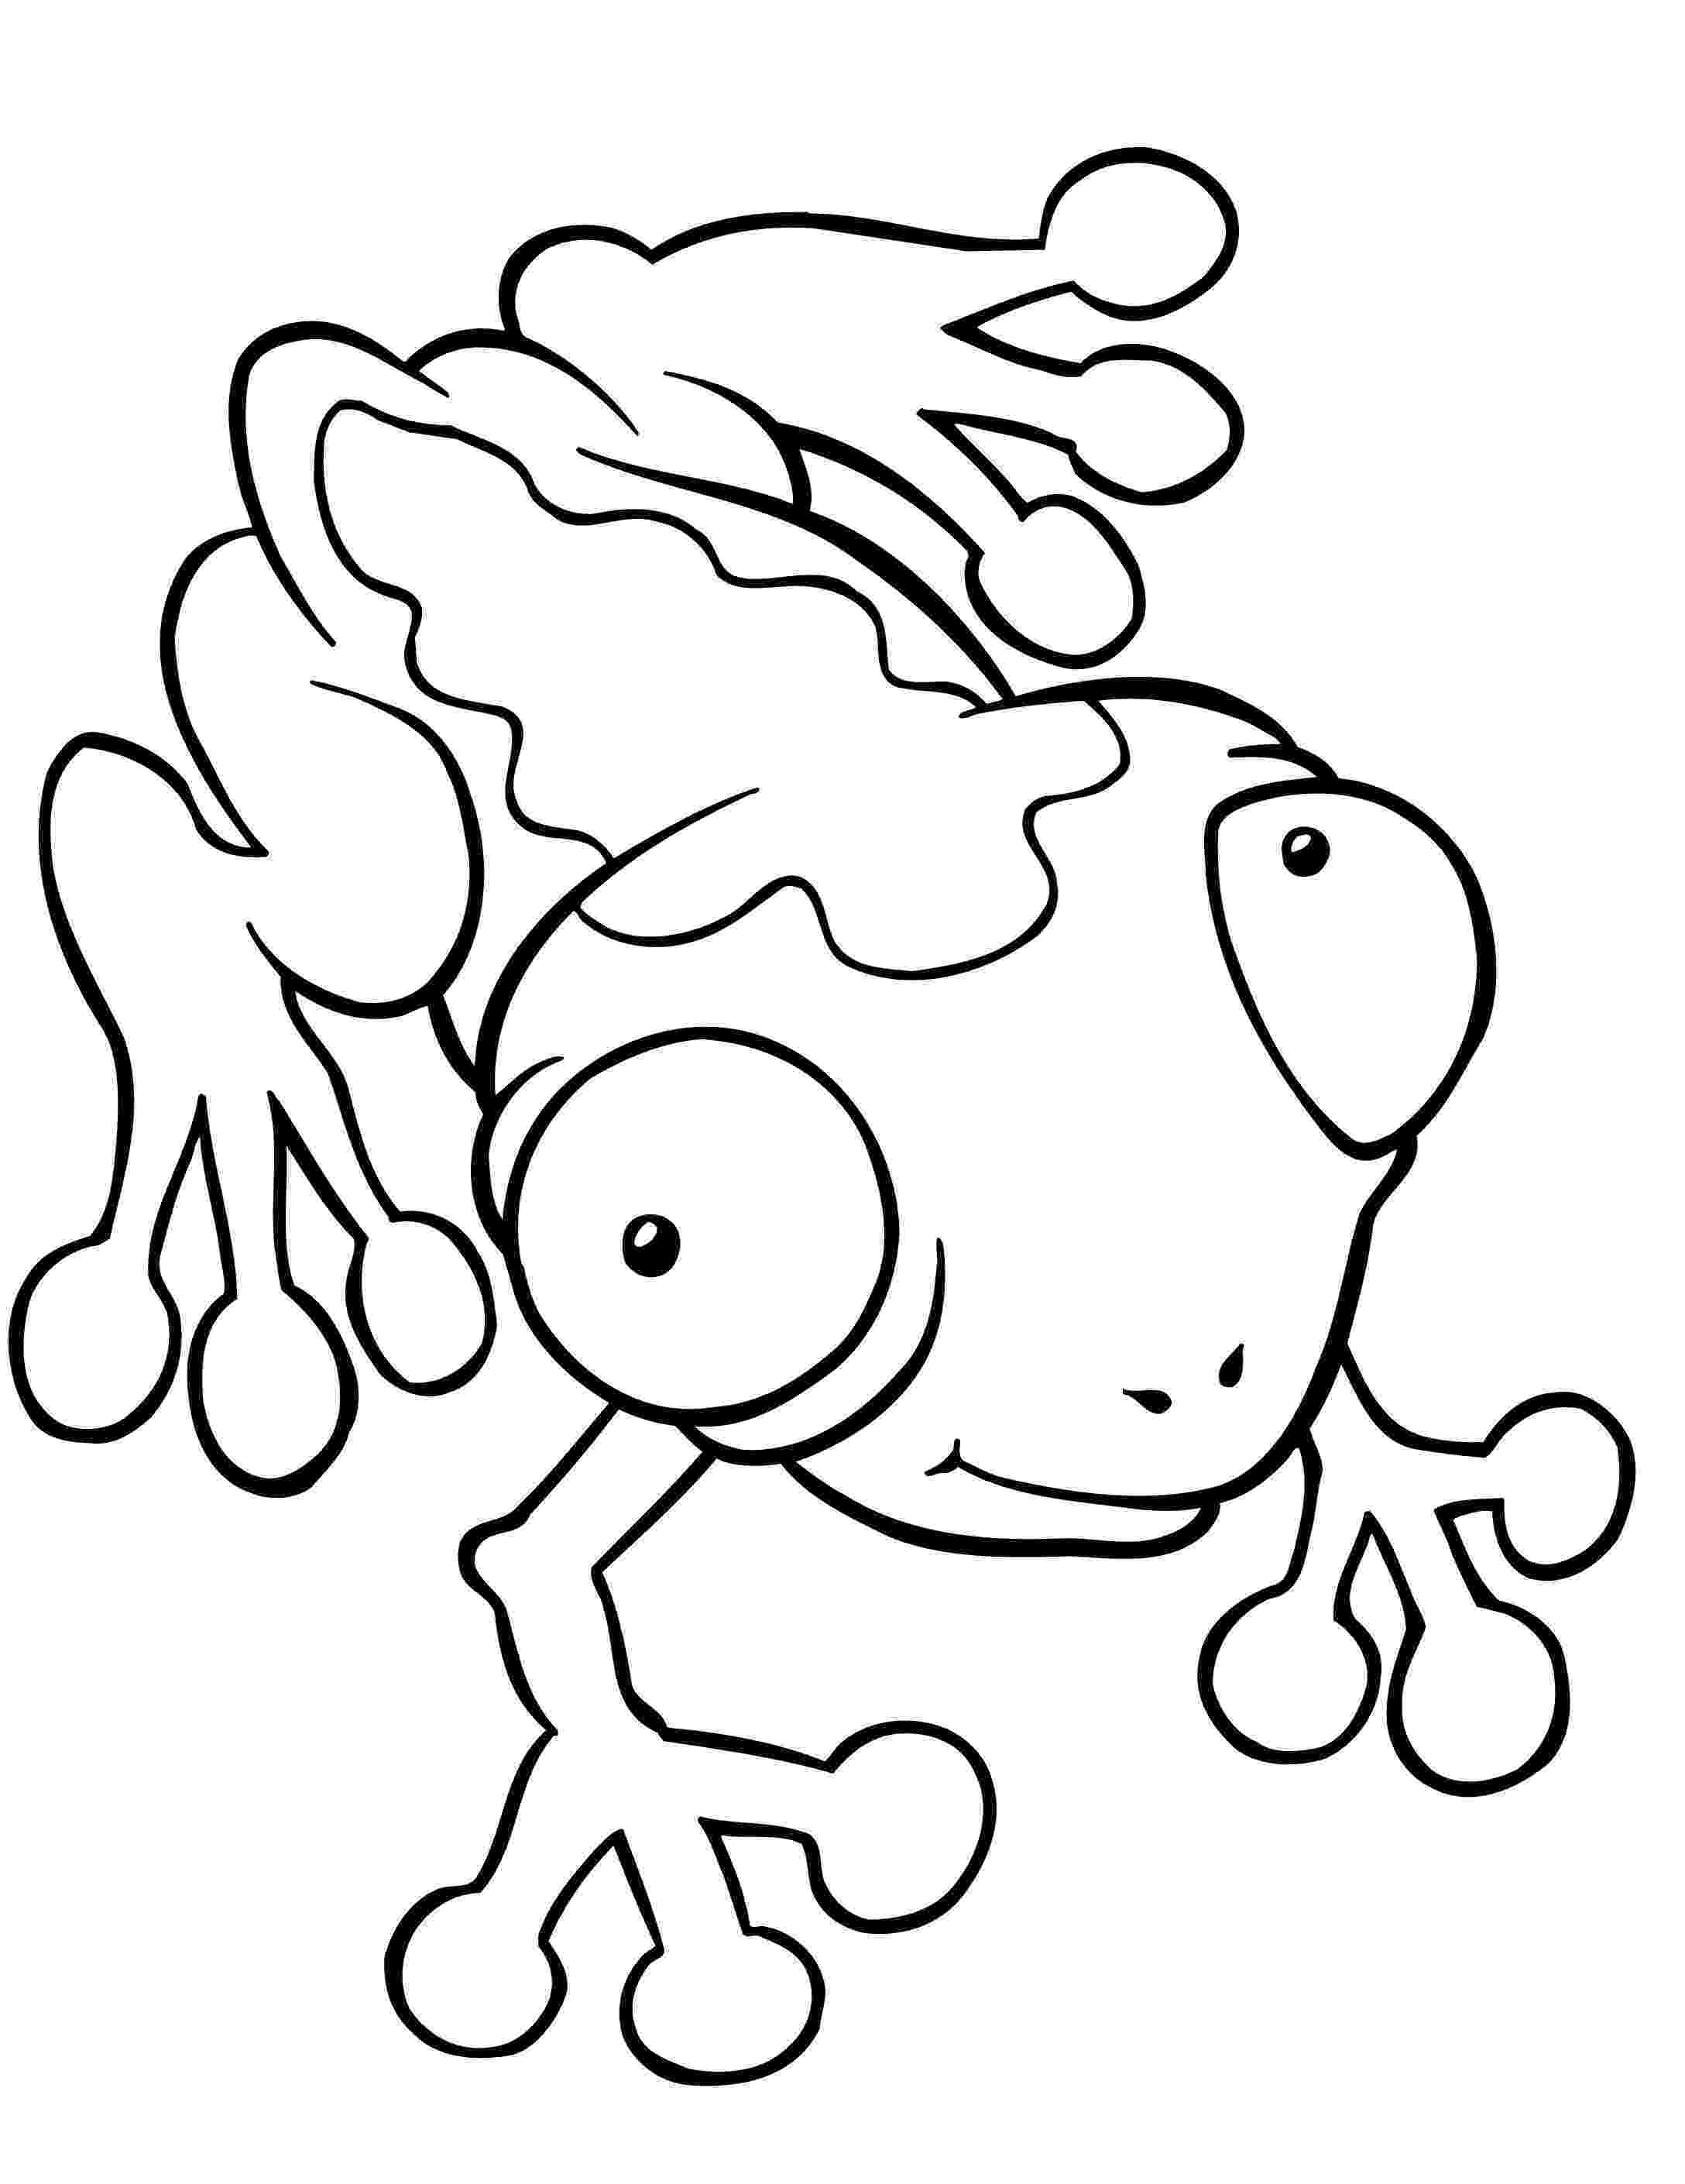 frog color by number frogs coloring pages to download and print for free color by frog number 